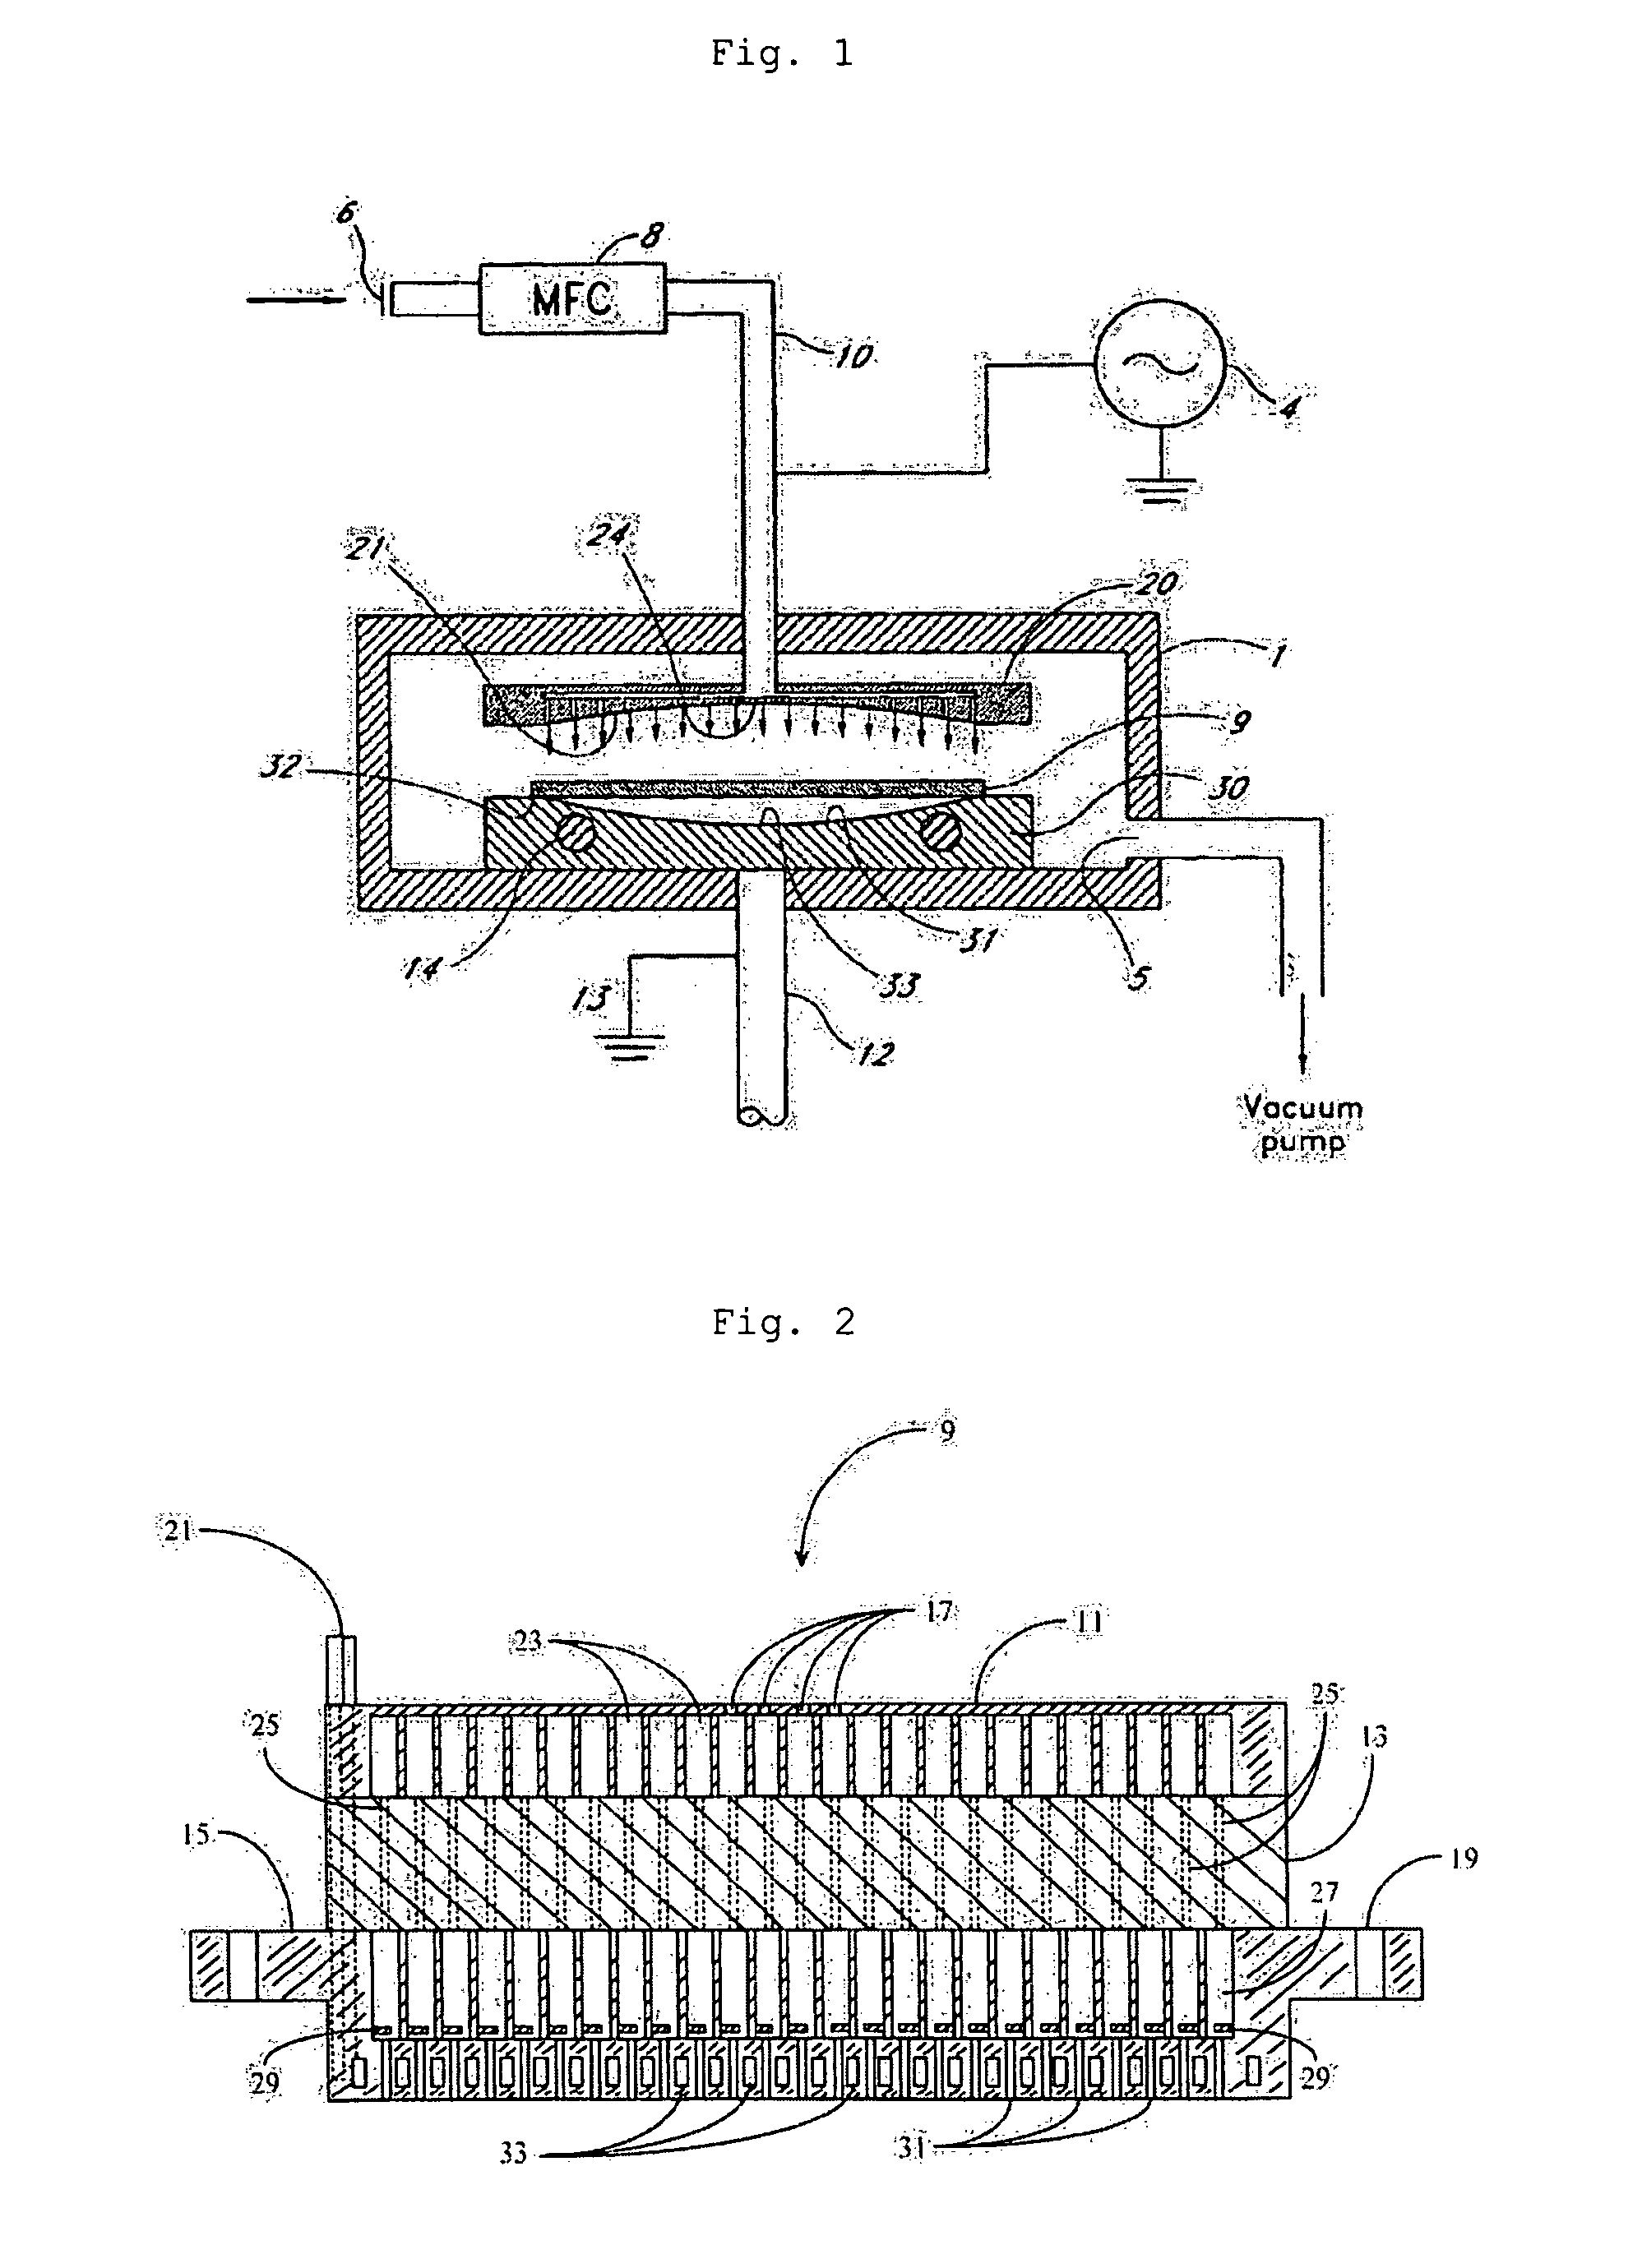 Method for chemical vapor deposition (CVD) with showerhead and method thereof